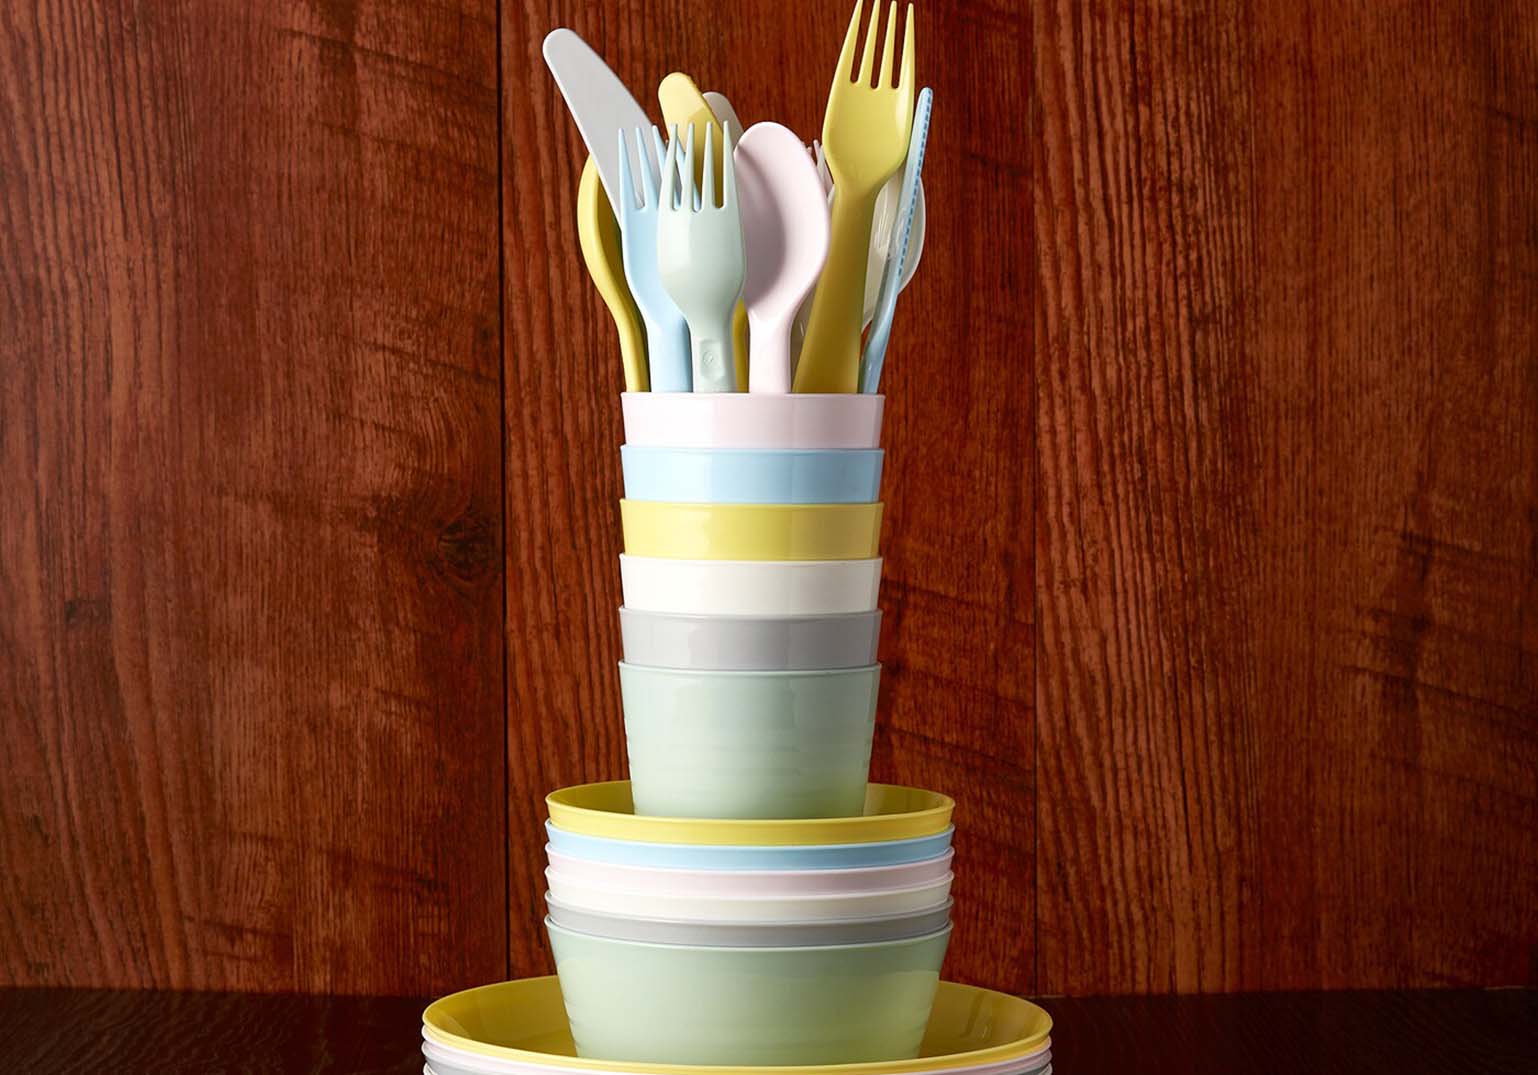 Elevate Family Dining with KALAS: Vibrant Essentials for a Joyful Mealtime Experience